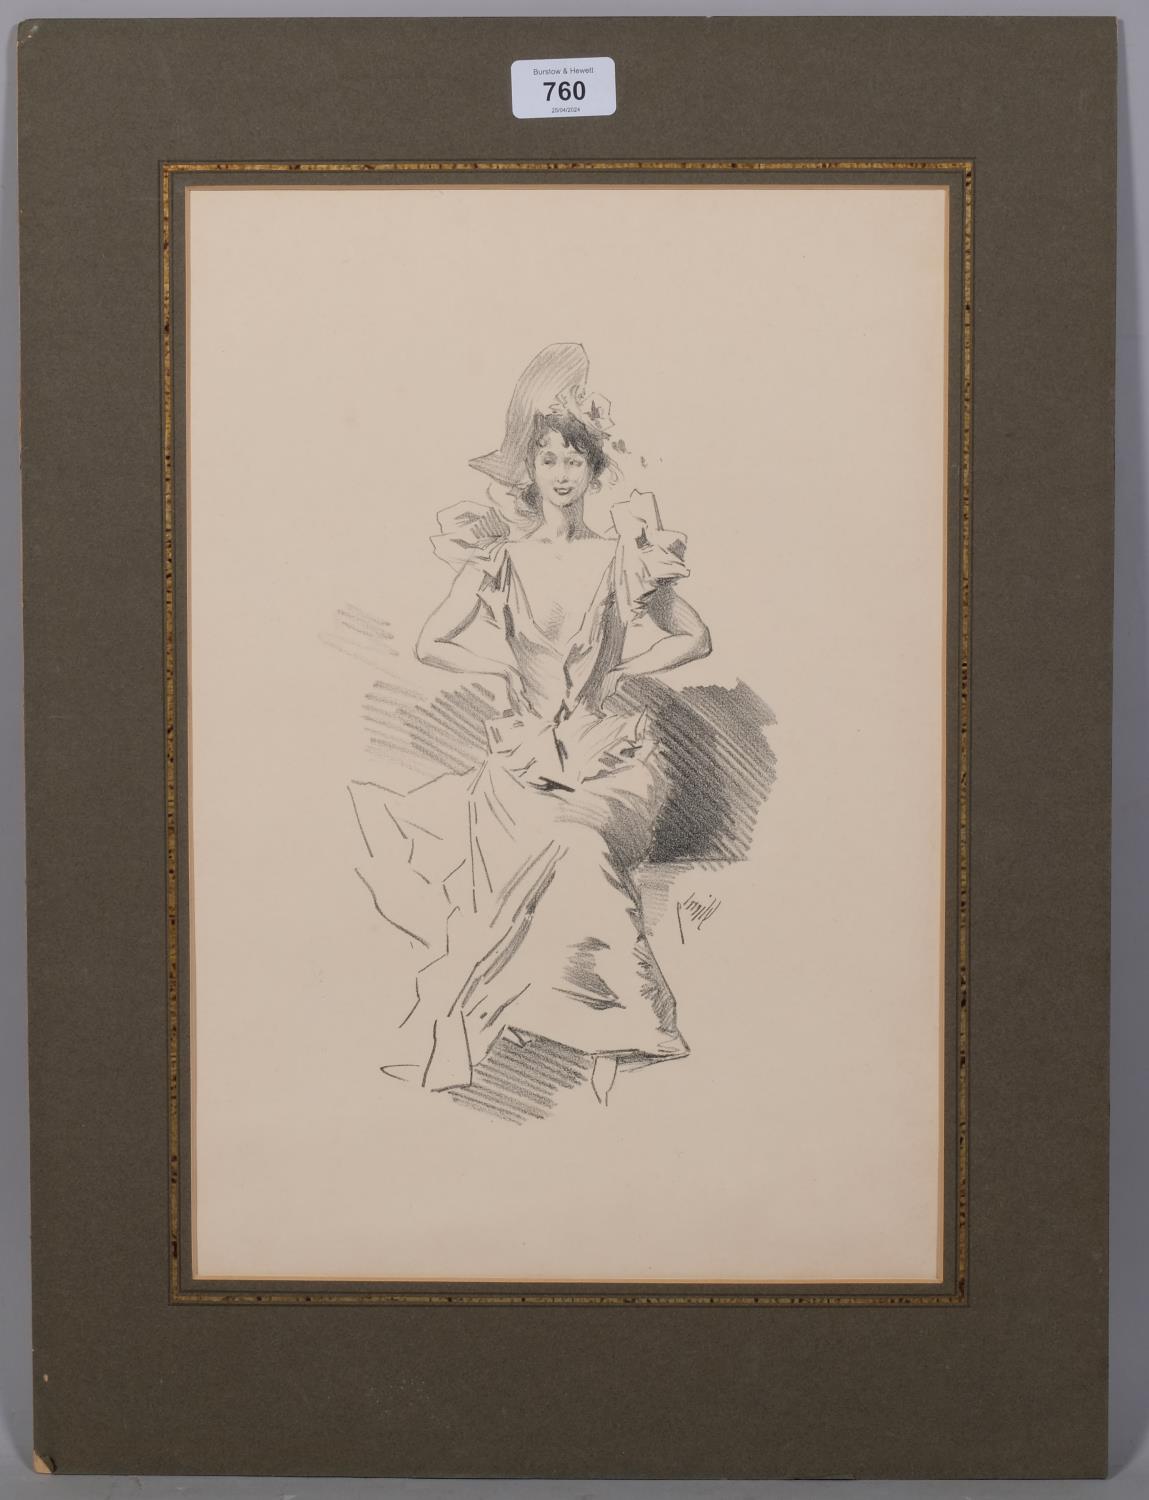 Jules Cheret (1836 - 1932), portrait of a woman, pencil on paper, signed, 41cm x 28cm, mounted - Image 2 of 4